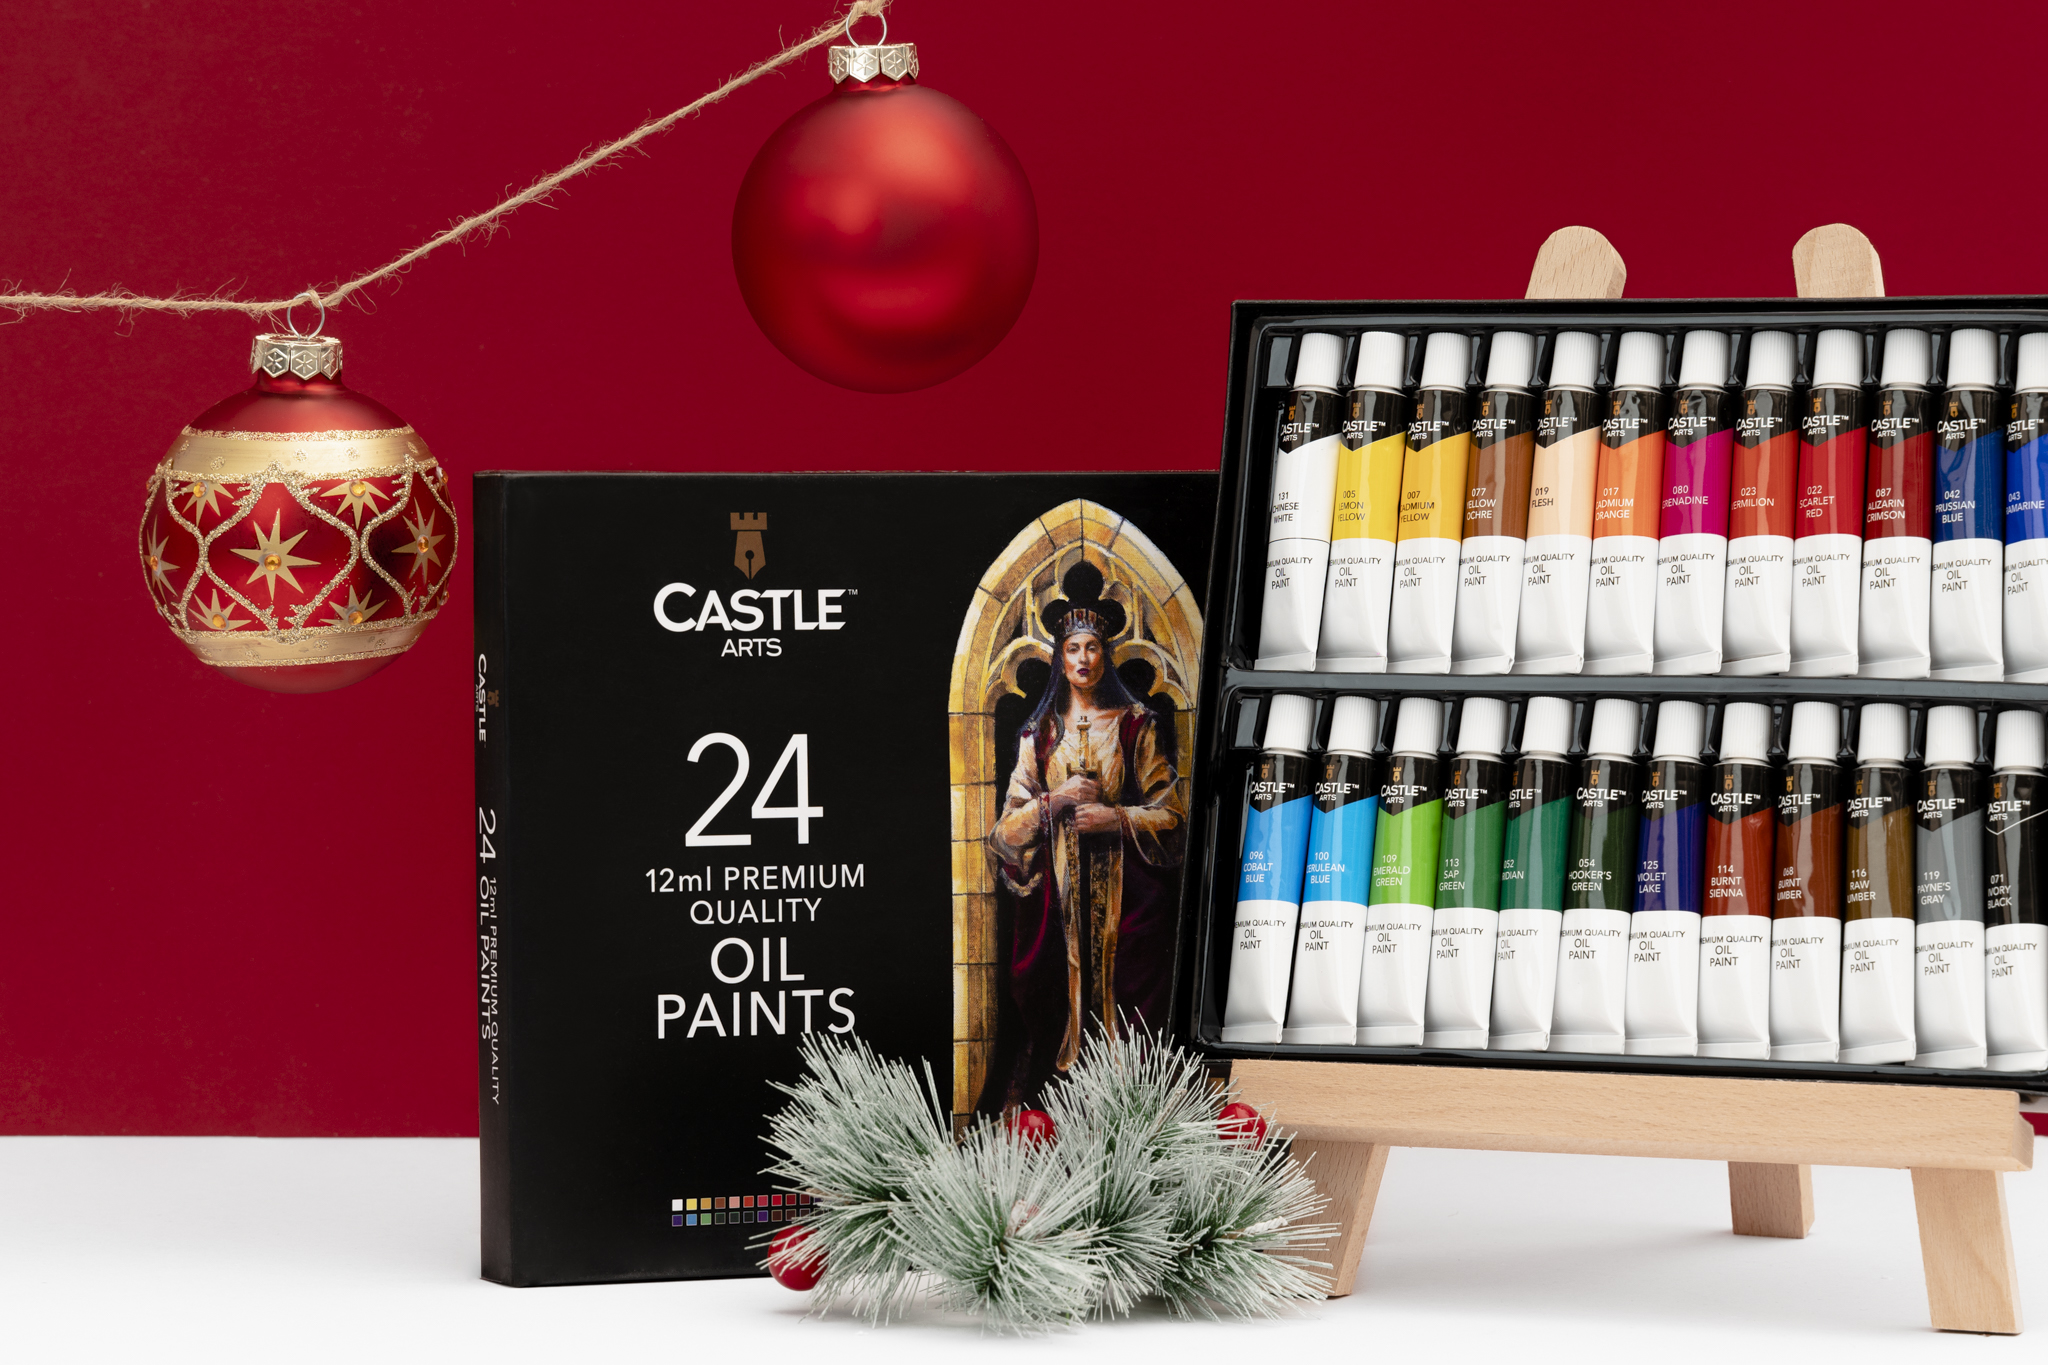 Castle Arts oil paints displayed with a festive backdrop.